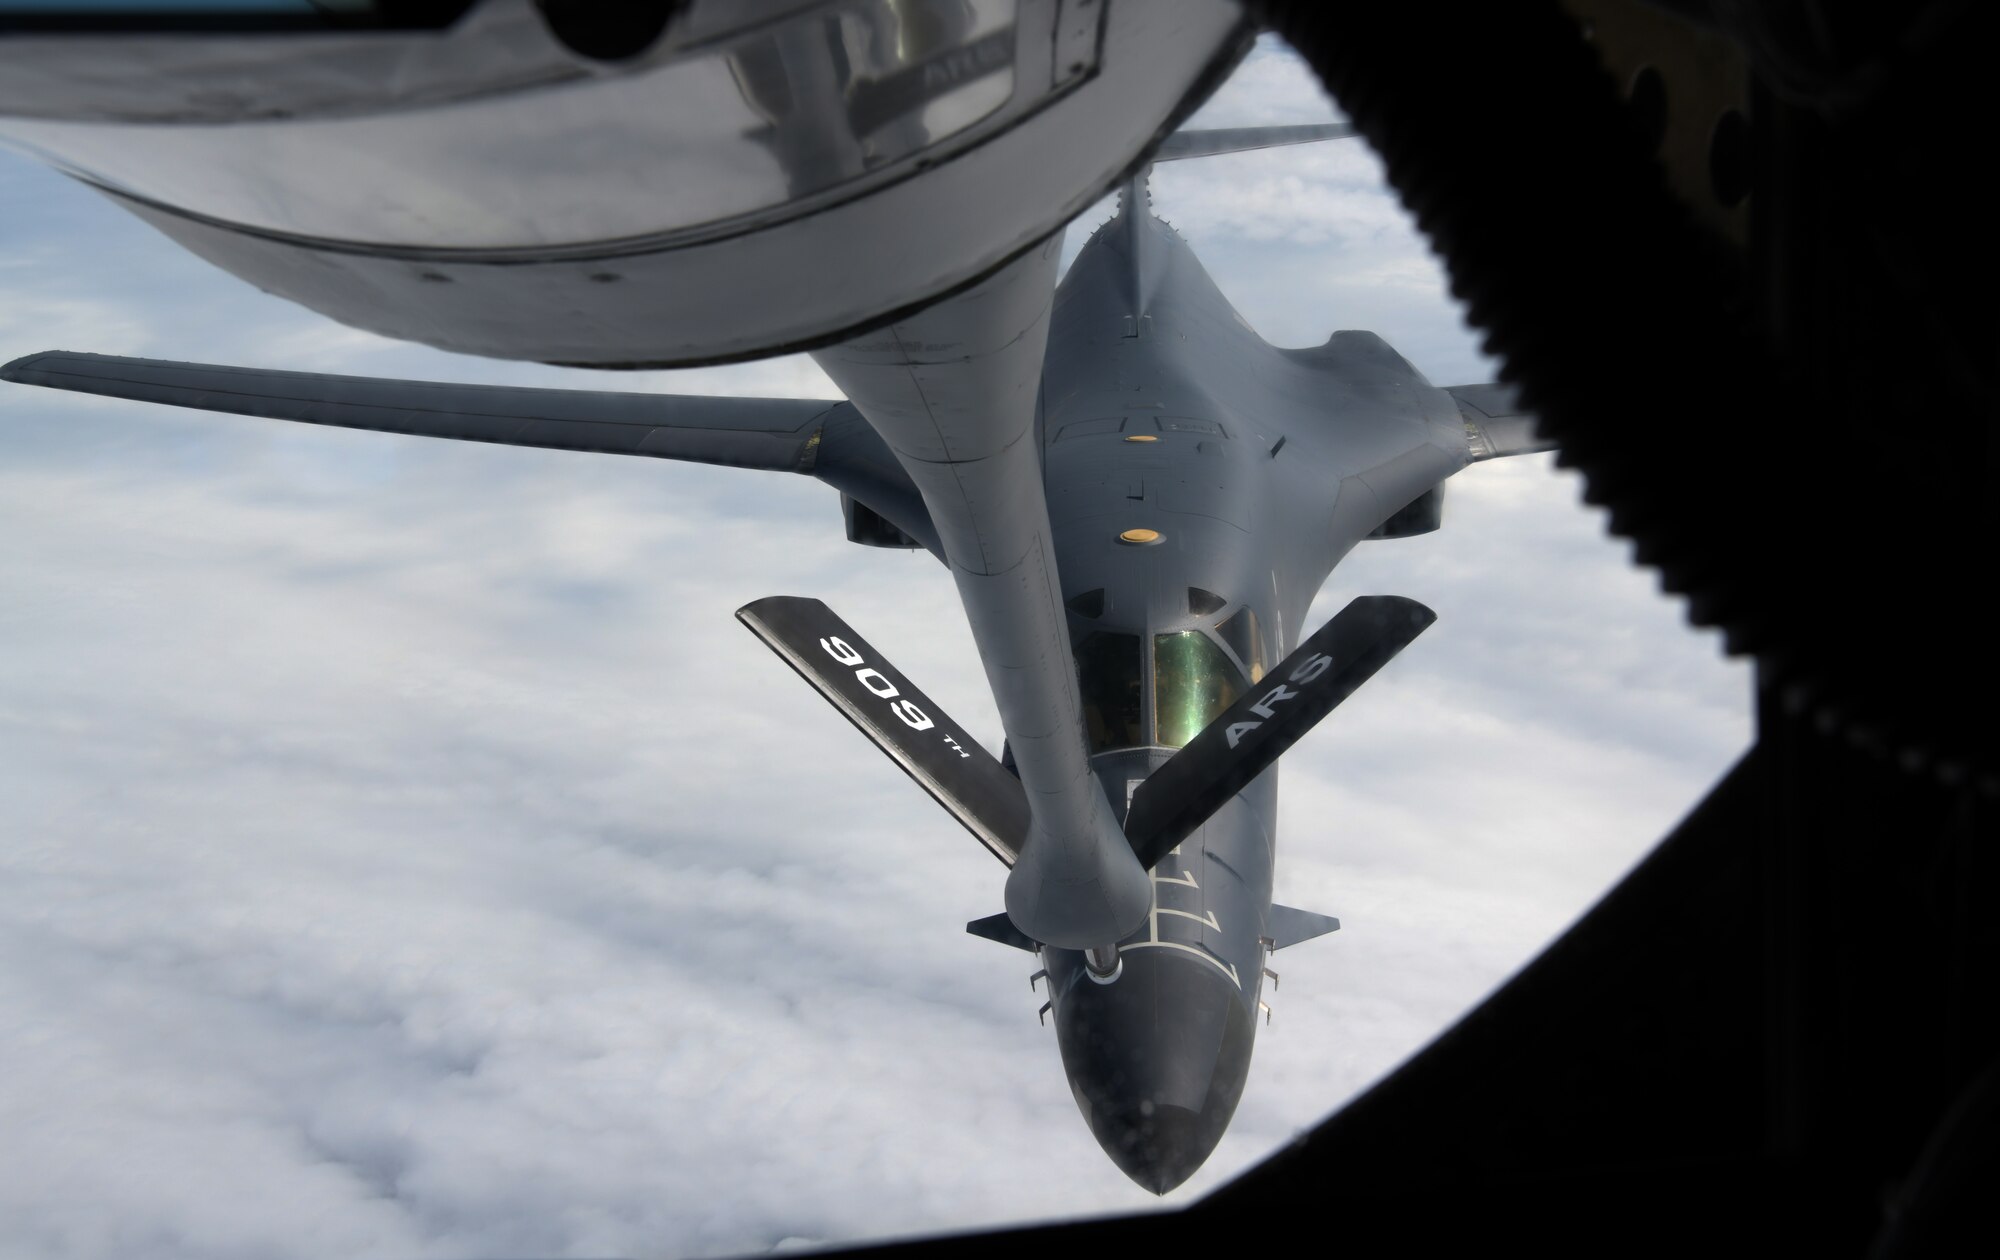 A KC-135 Stratotanker assigned to the 909th Air Refueling Squadron, Kadena Air Base, Japan, refuels a B-1B Lancer from the 28th Bomb Wing, Ellsworth Air Force Base, S.D., during a Bomber Task Force mission, July 17, 2020. The Unites States security presence, along with our allies and partners, underpins the peace and stability that has enabled the Indo-Pacific region to develop and prosper for more than seven decades. (U.S. Air Force photo by Airman 1st Class Rebeckah Medeiros)